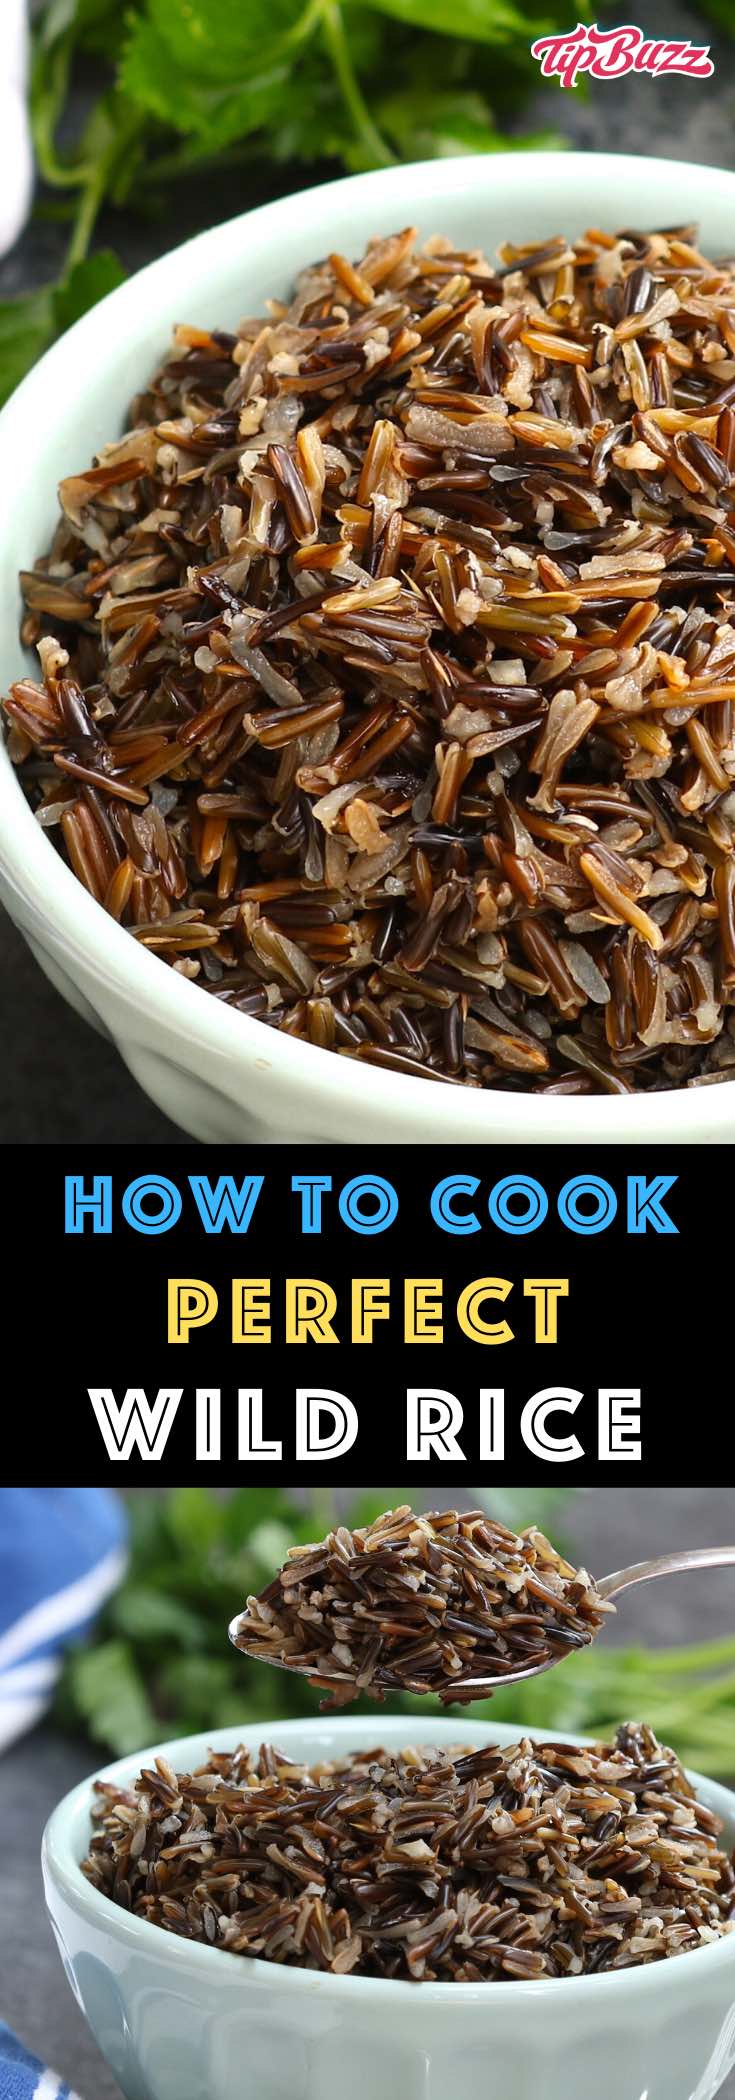 Wild rice is healthy and delicious with a fluffy texture and a nutty flavor. Learn the different ways to make it including stovetop, oven, microwave and Instant Pot!